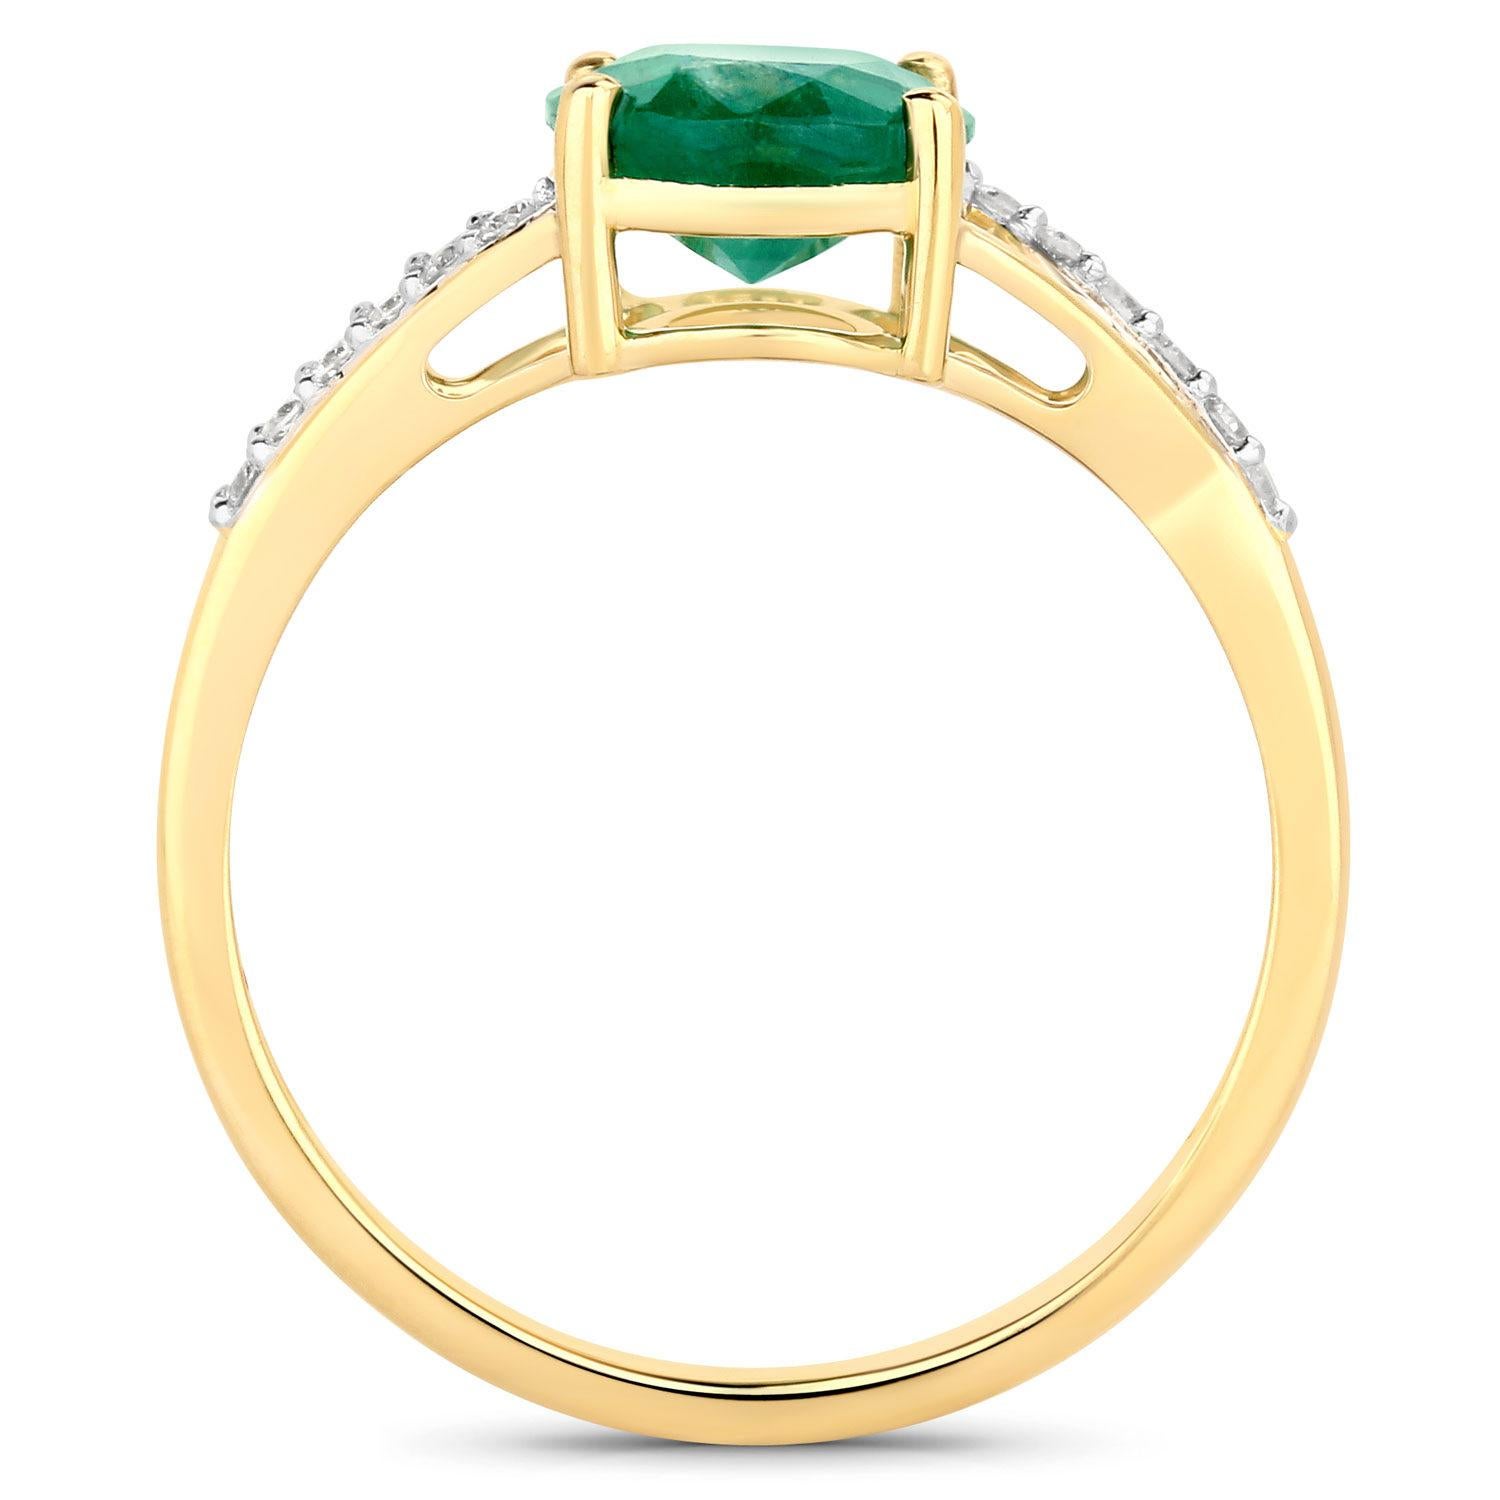 Zambian Emerald Cocktail Ring Diamond Setting 1.70 Carats 14K Yellow Gold In Excellent Condition For Sale In Laguna Niguel, CA